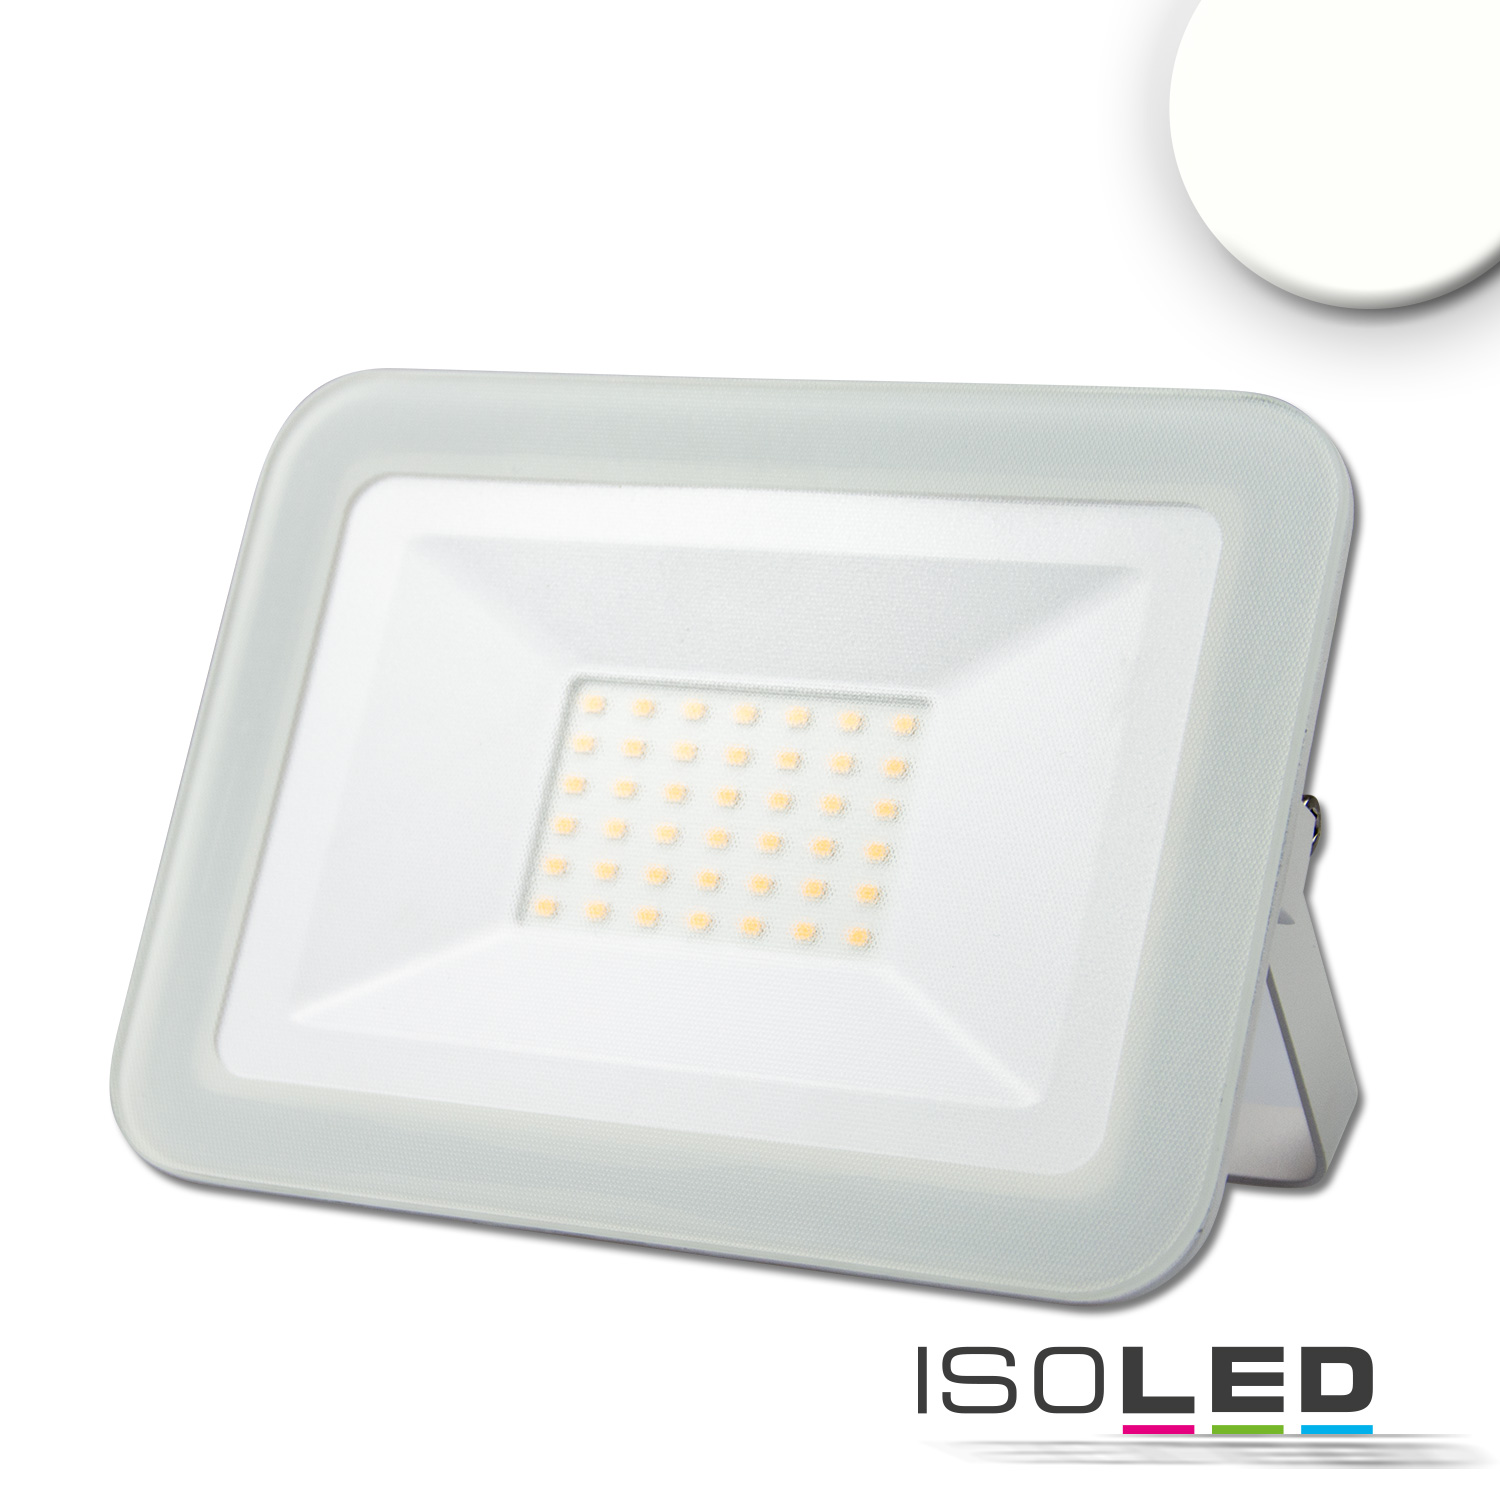 ISOLED 115109 LED Fluter Pad 30W, weiss, 4000K 100cm Kabel